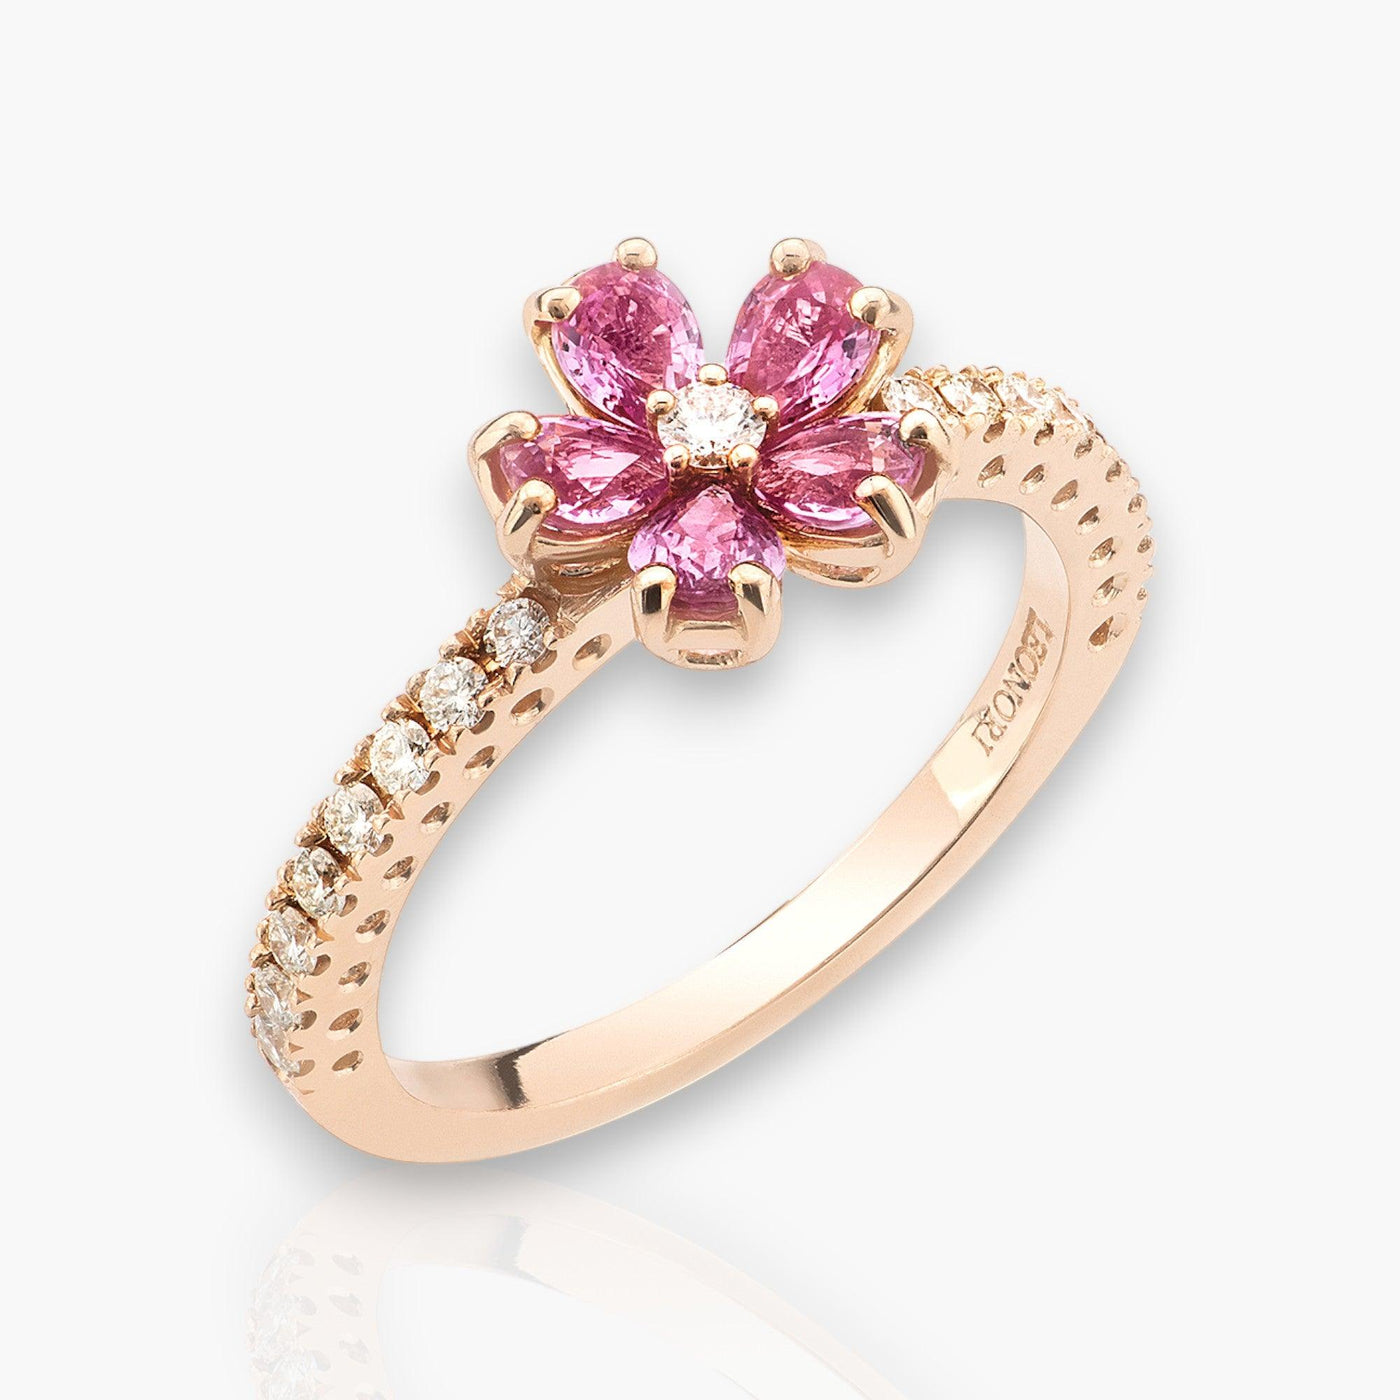 Ring "Cherry Blossom", Rose Gold, Pink Sapphire and Diamonds - Moregola Fine Jewelry